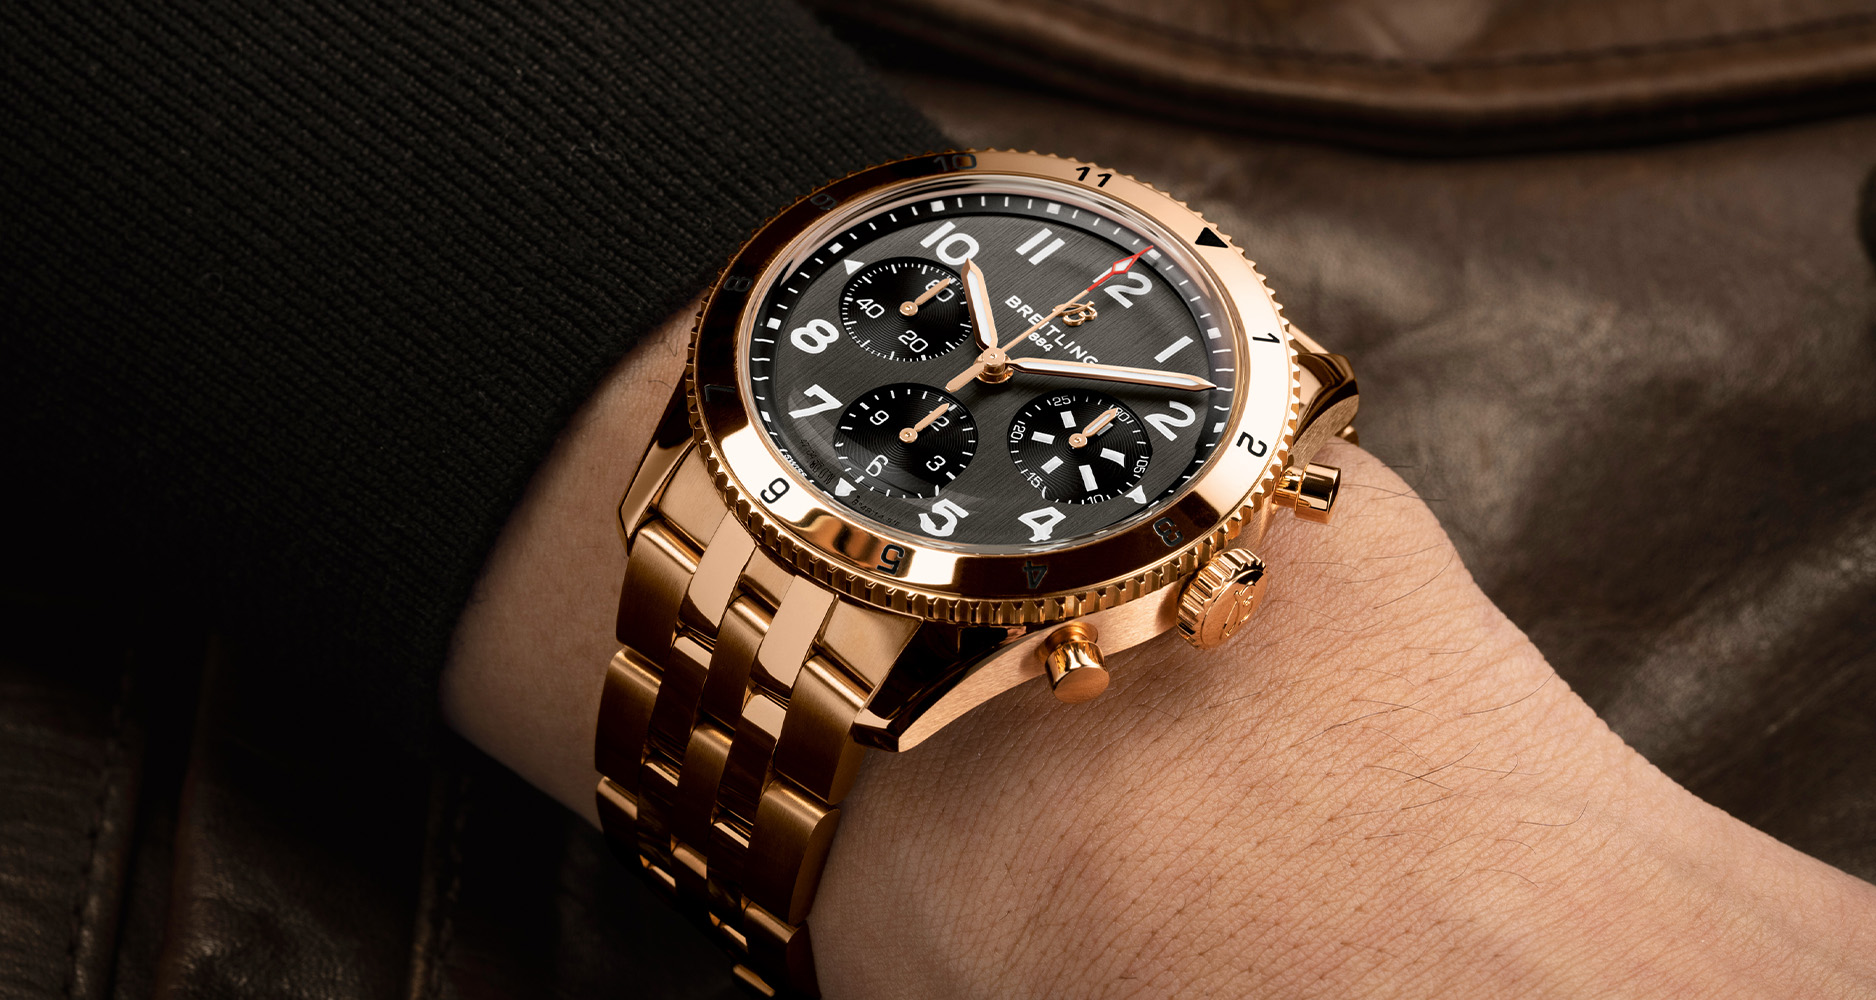 The Breitling Classic AVI Chronograph 42 P-51 Mustang in rose gold with full gold bracelet. 